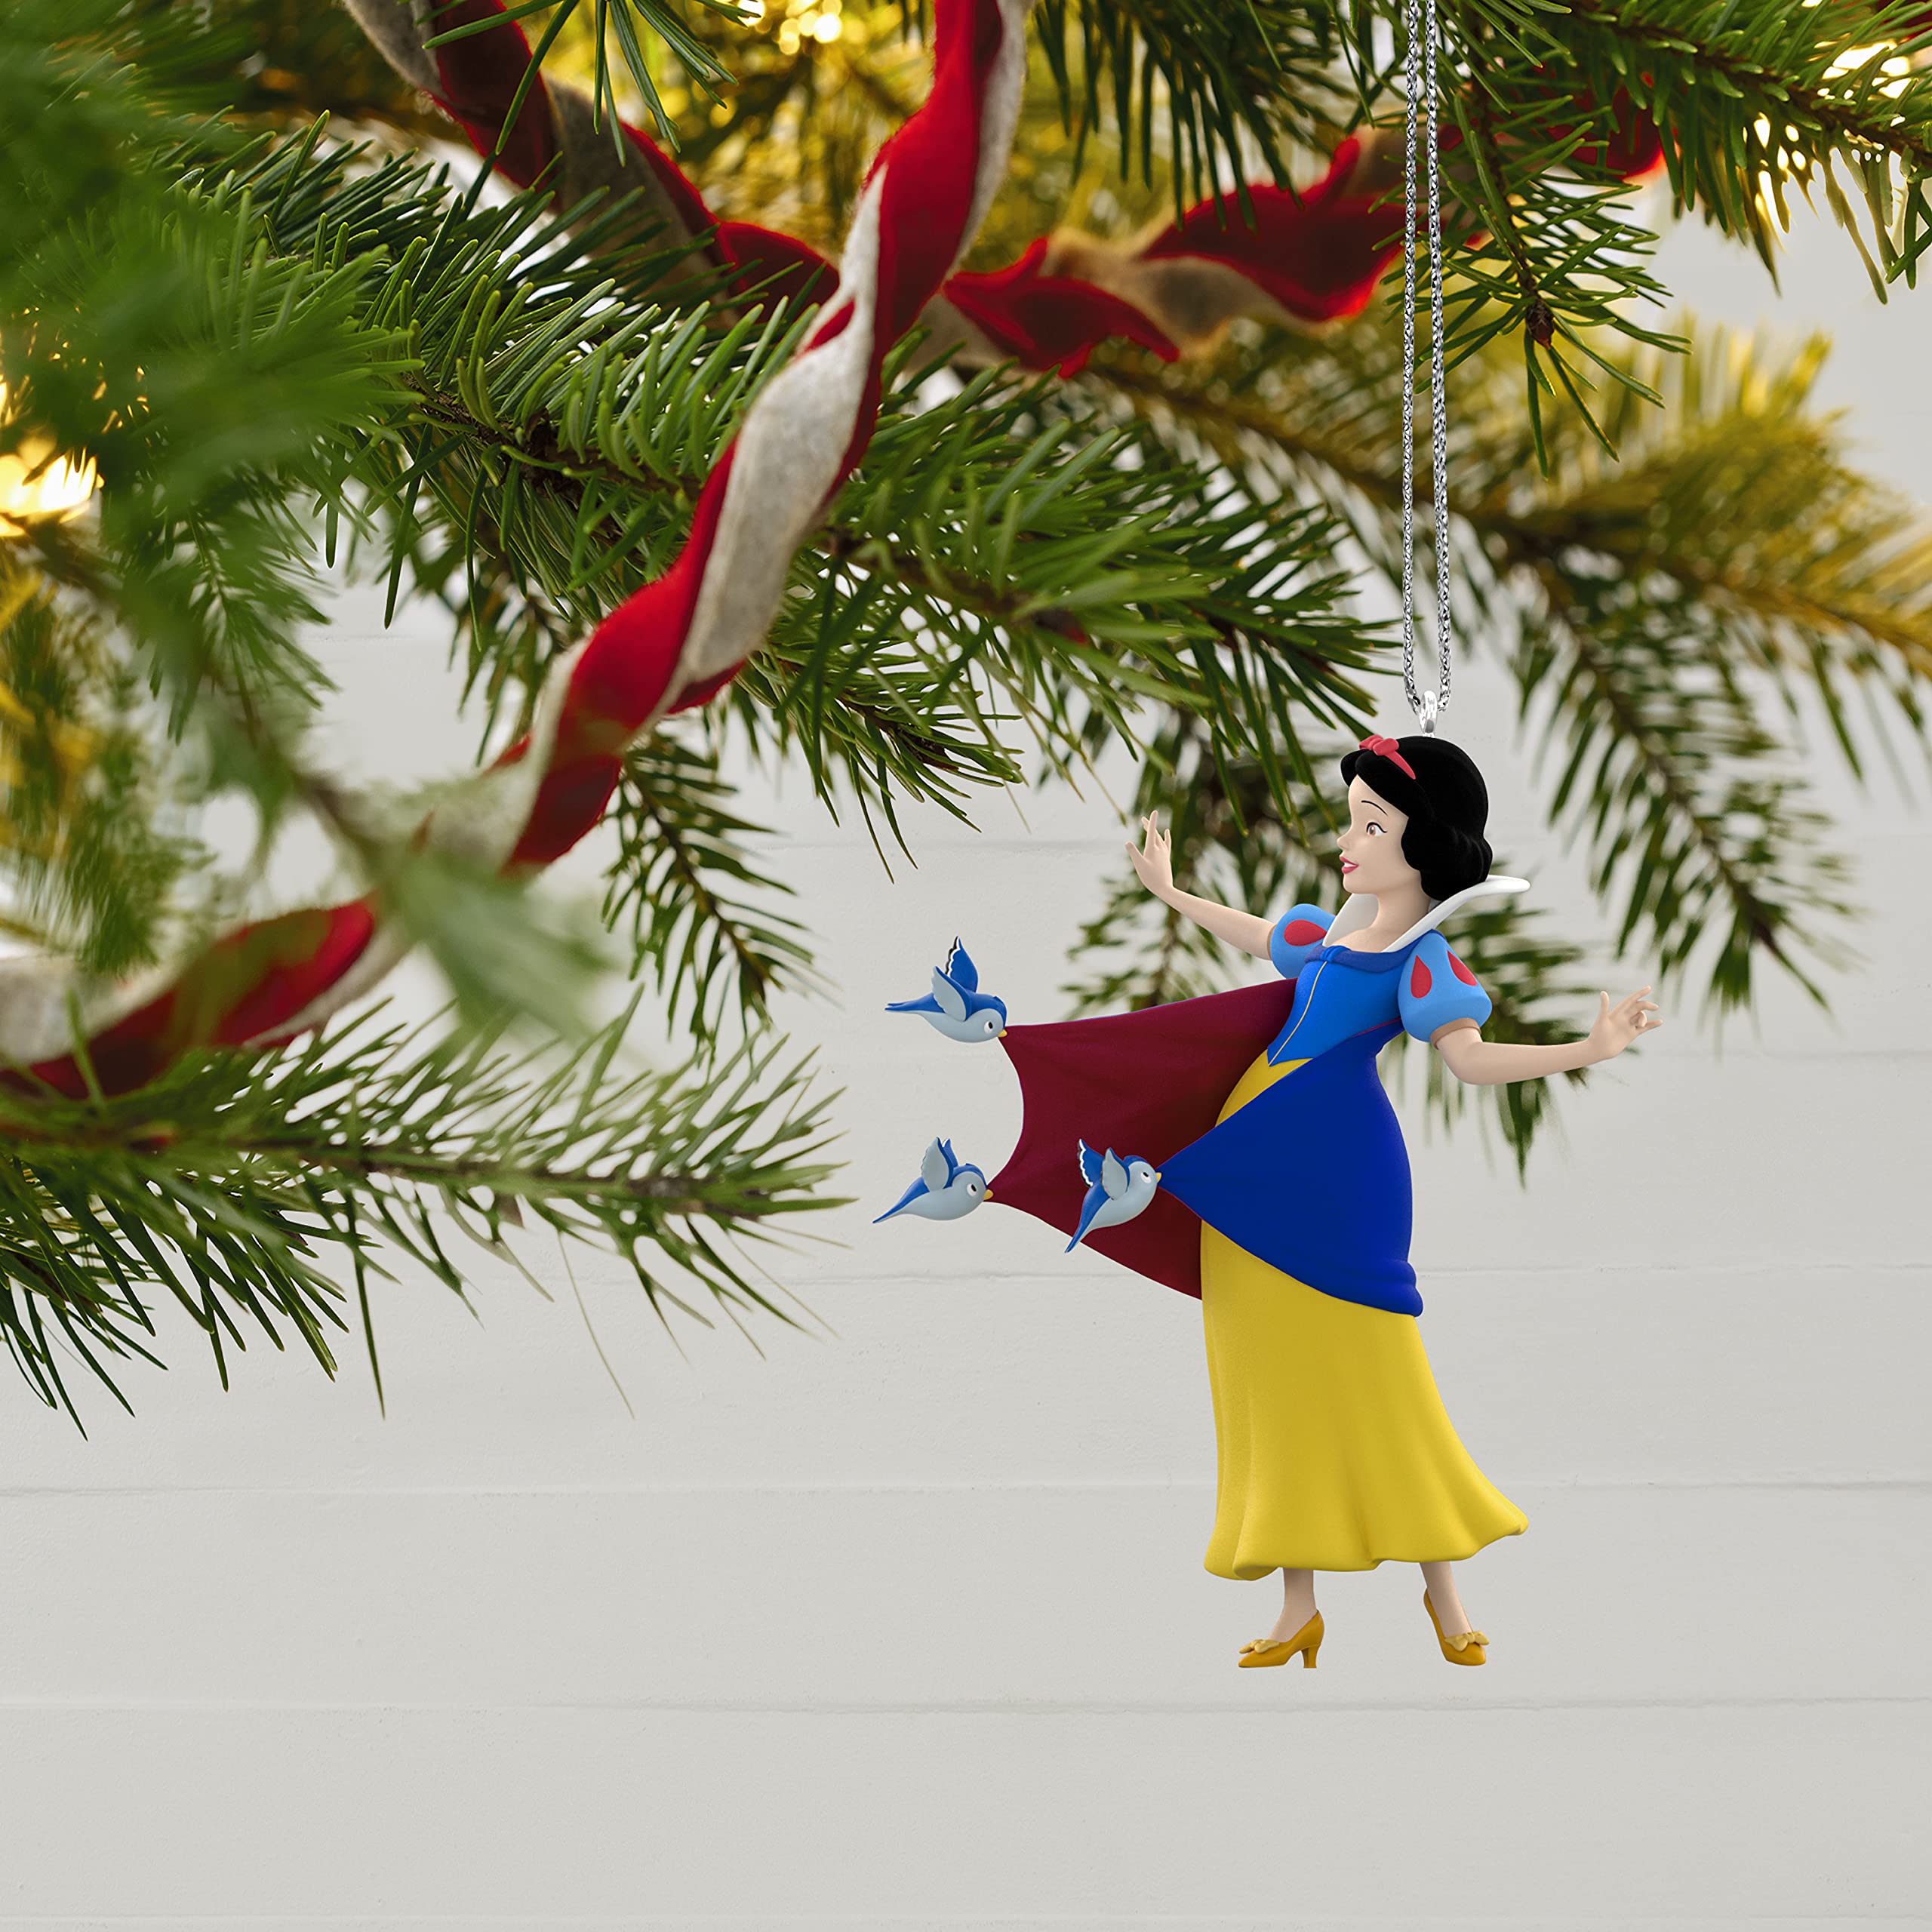 Hallmark Keepsake Christmas Ornament 2021, Disney Snow White and The Seven Dwarfs with a Smile and a Song